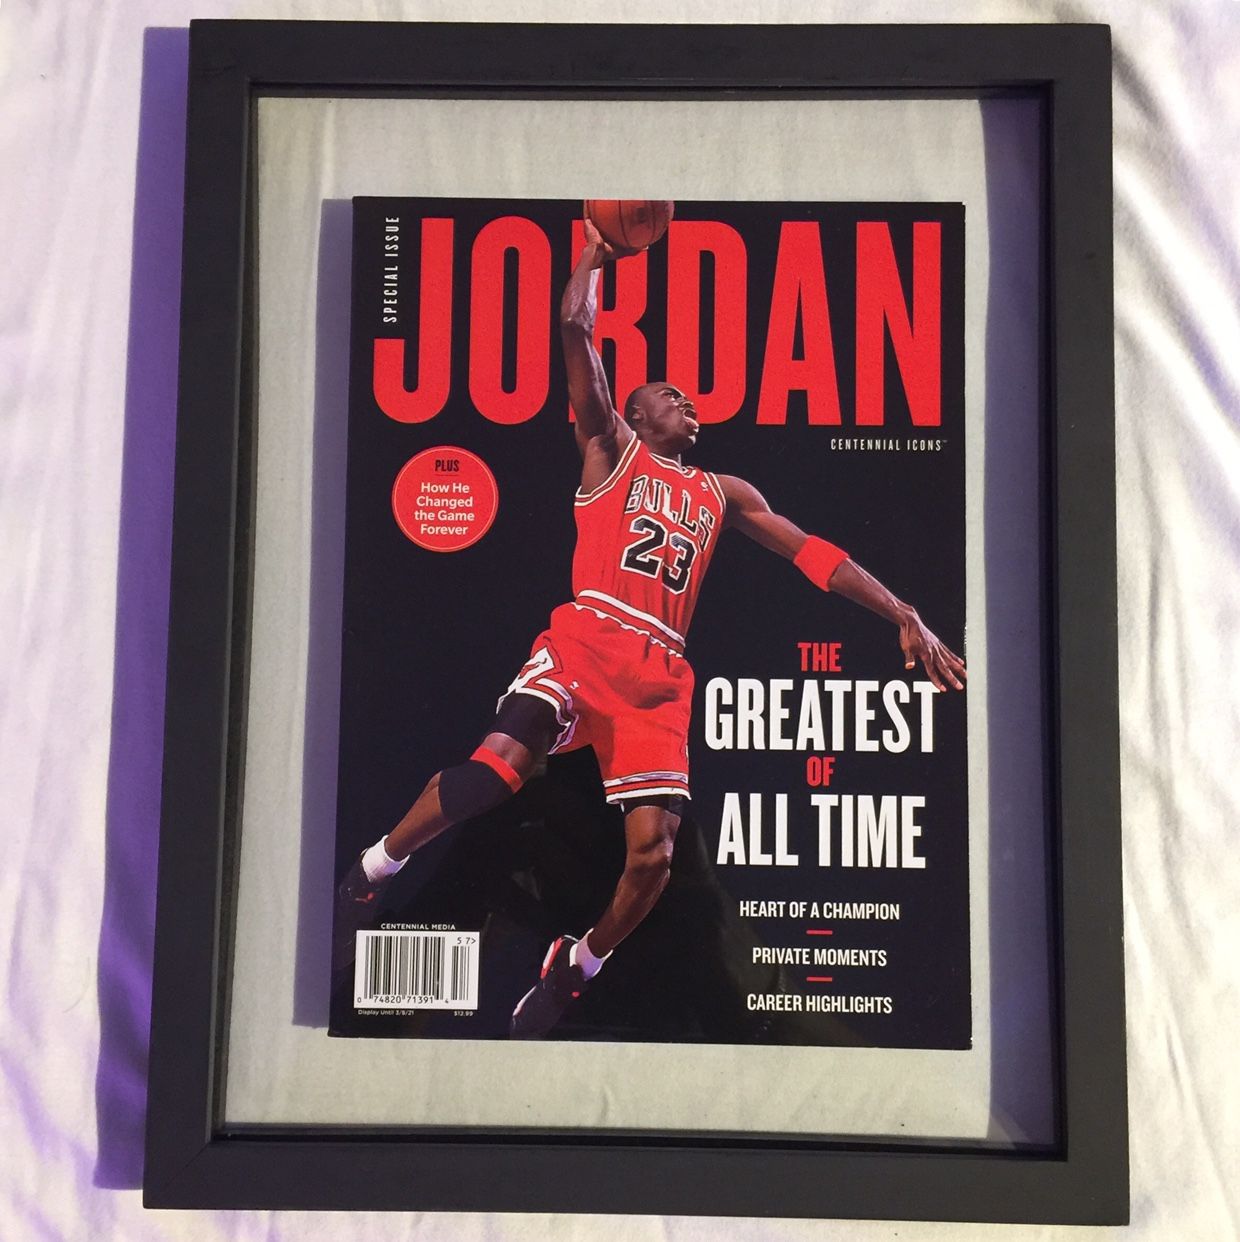 GREATEST OF ALL TIME: MICHAEL JORDAN - CENTENNIAL ICON Sale Today!!!